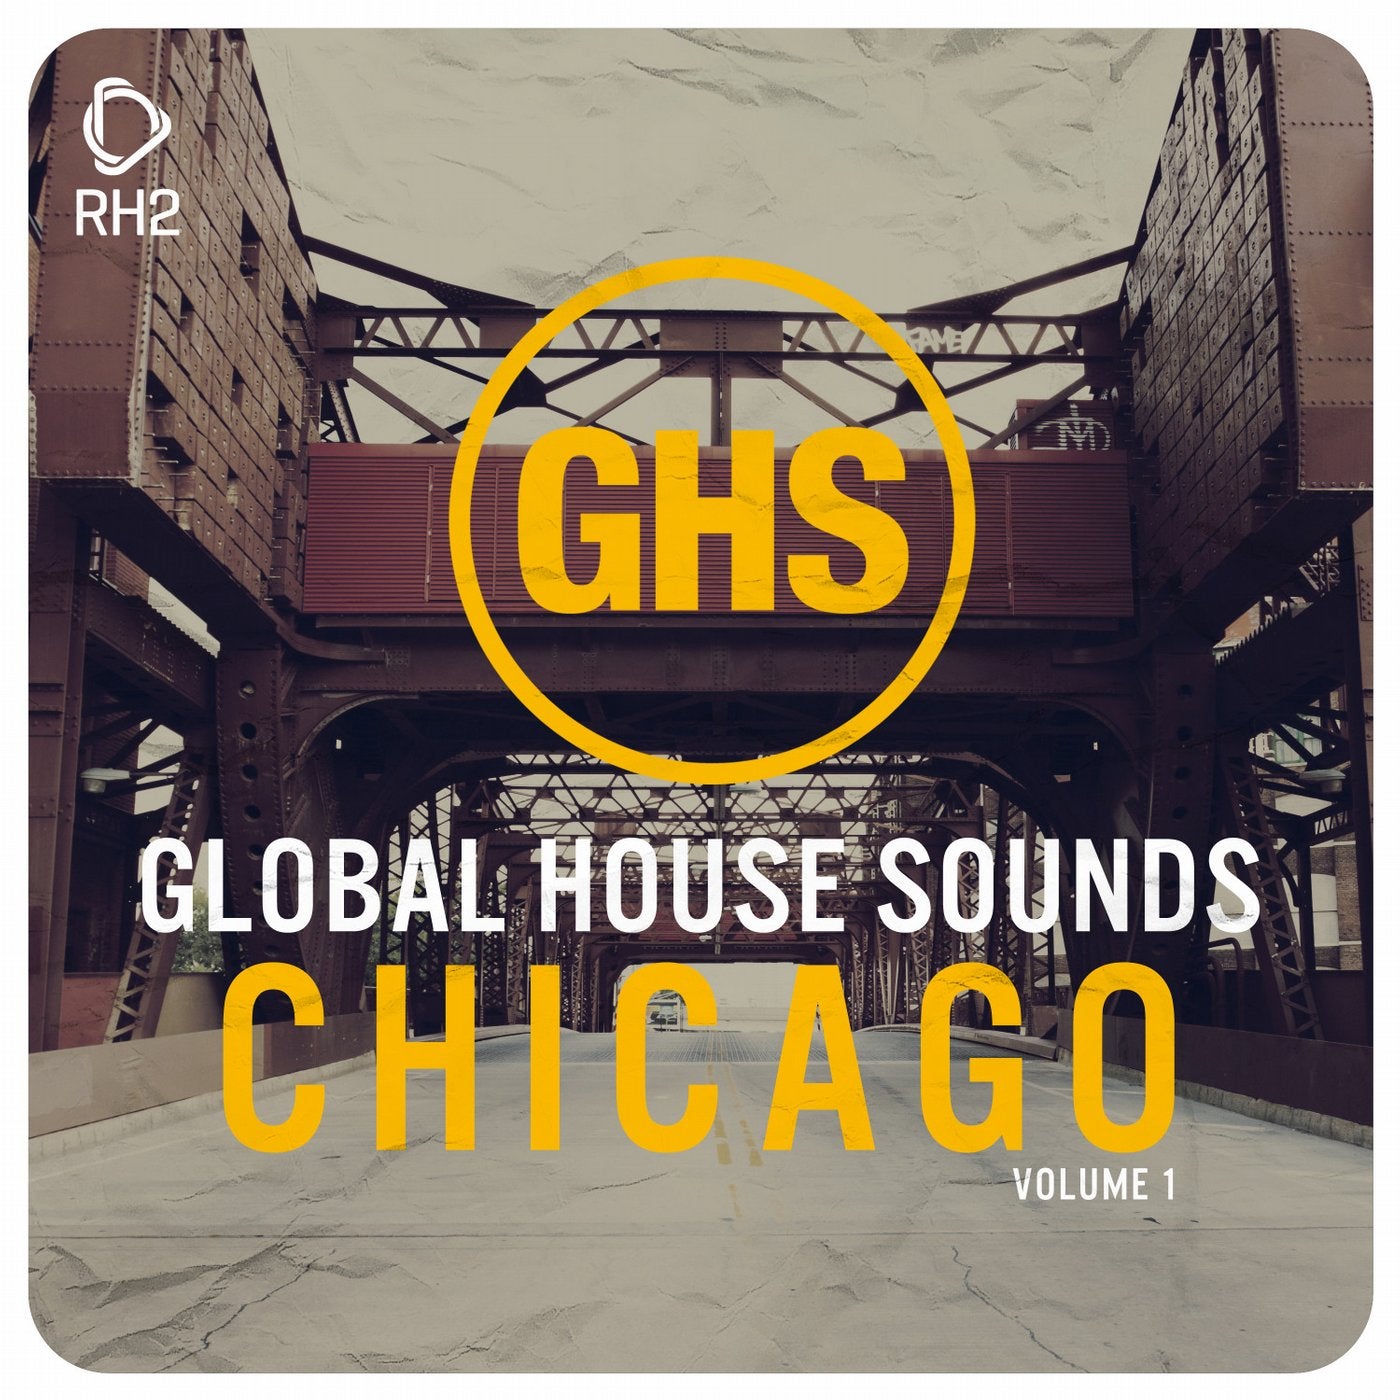 Global House Sounds - Chicago Vol. 1